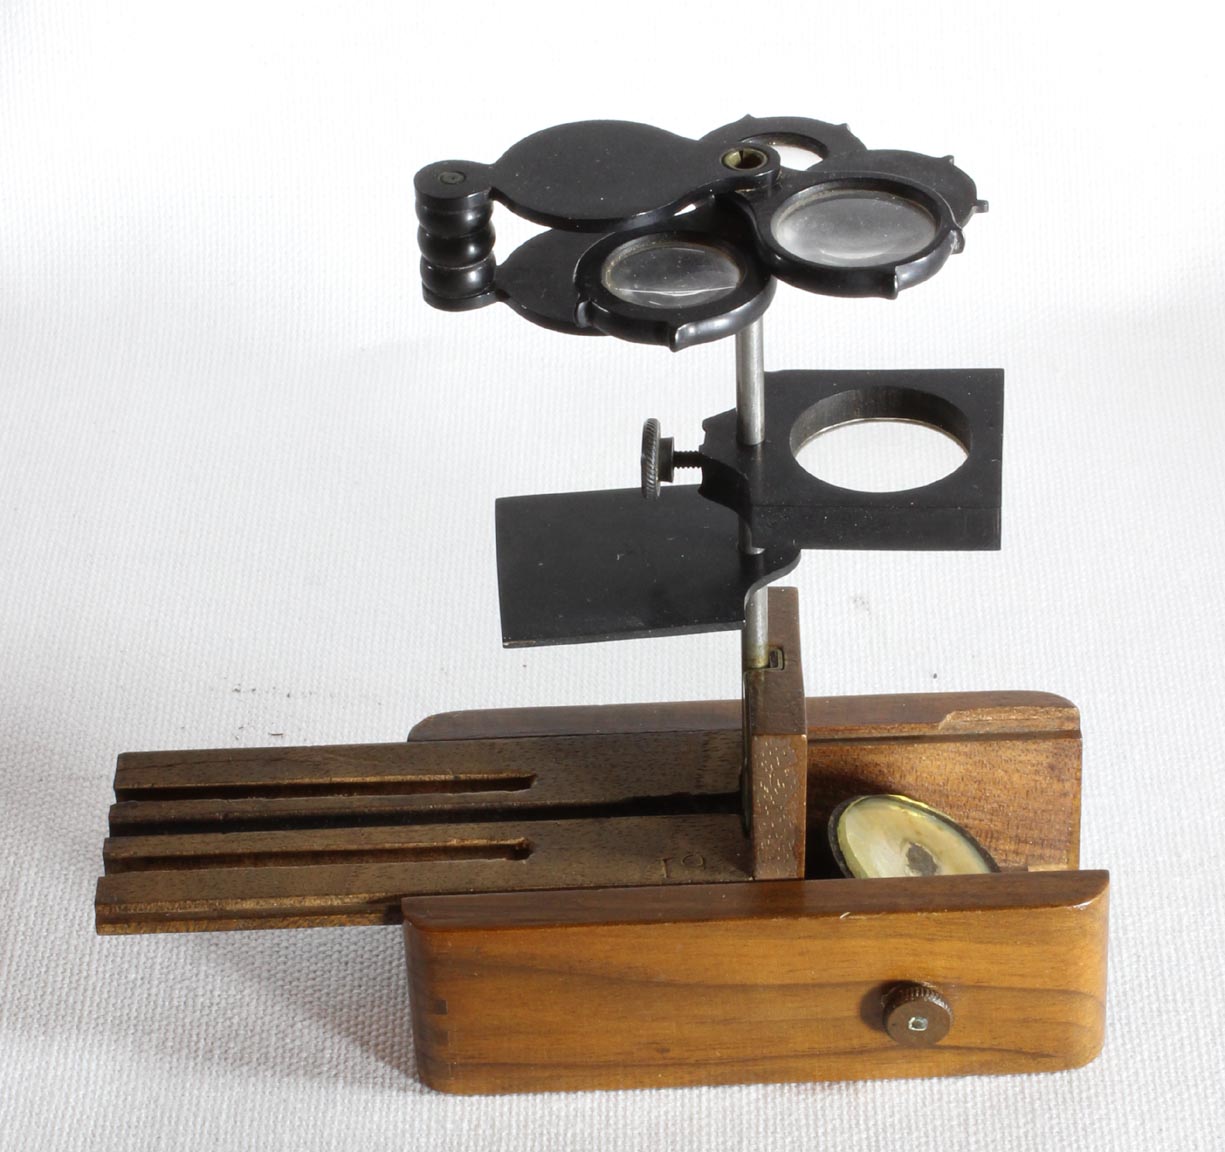 Excelsior Microscope